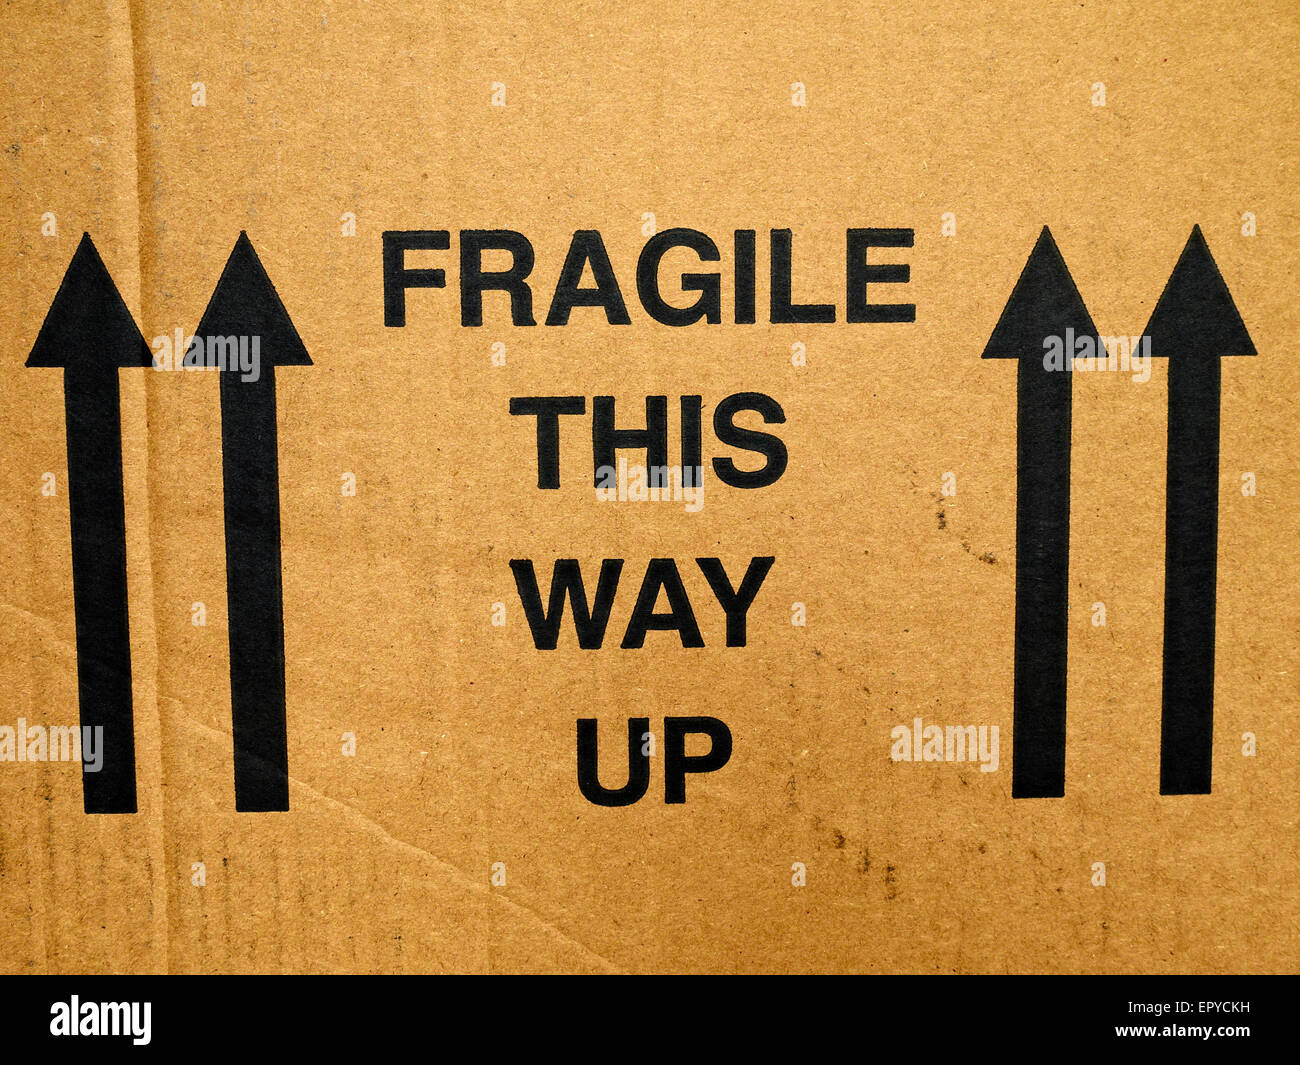 Fragile, This way up warning sign on cardboard box Stock Photo